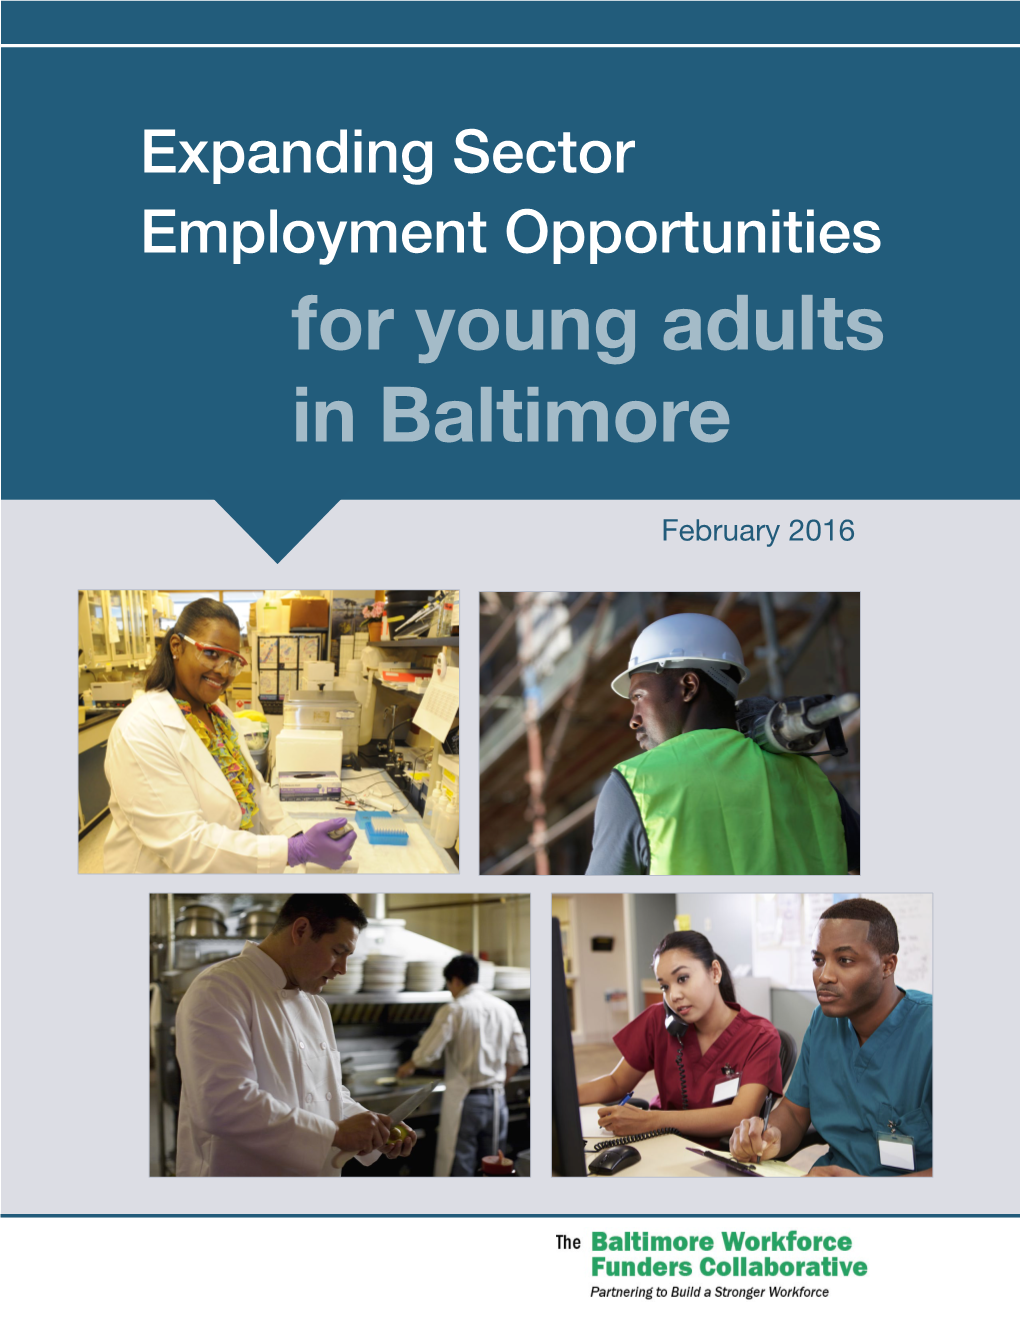 Expanding Sector Employment Opportunities for Young Adults in Baltimore